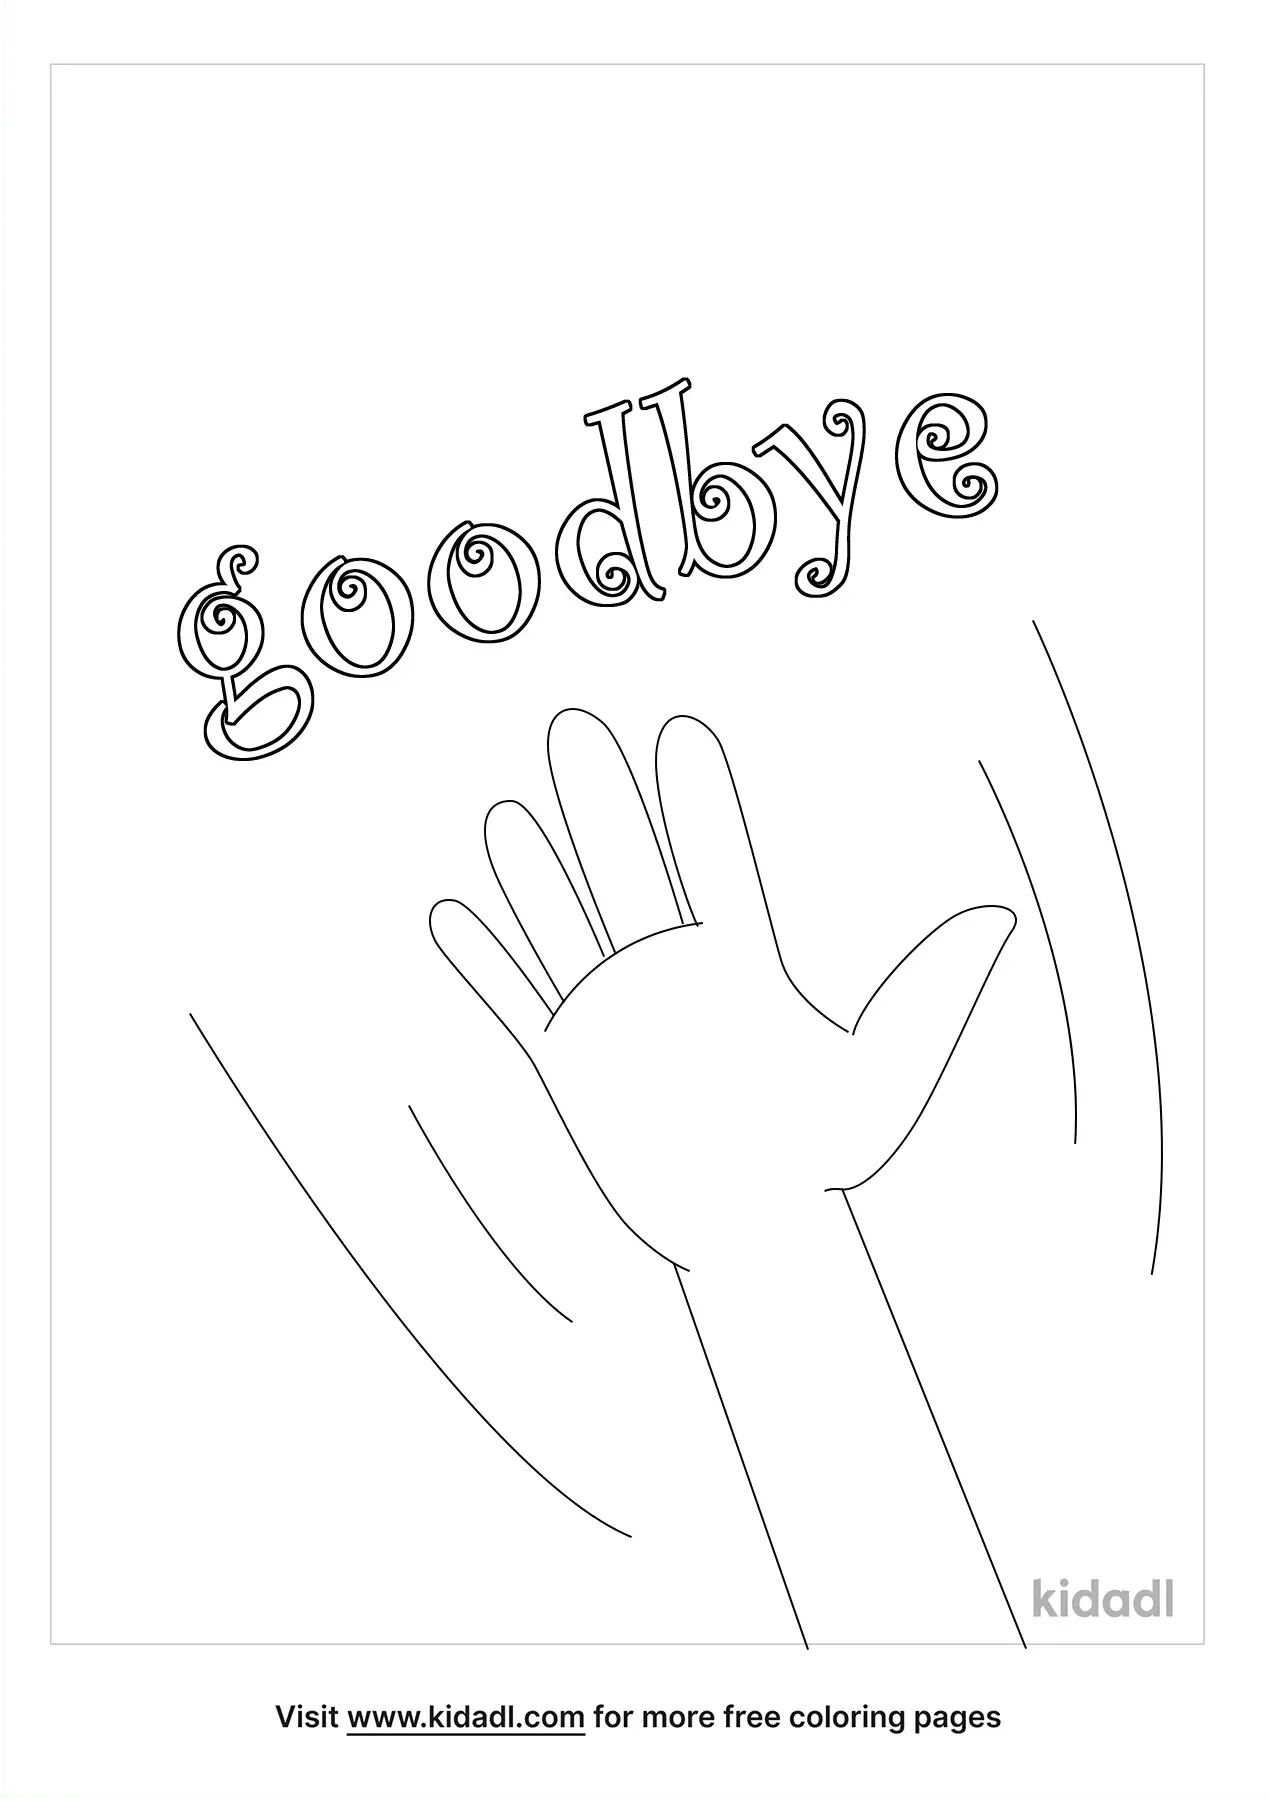 goodbye-coloring-pages-free